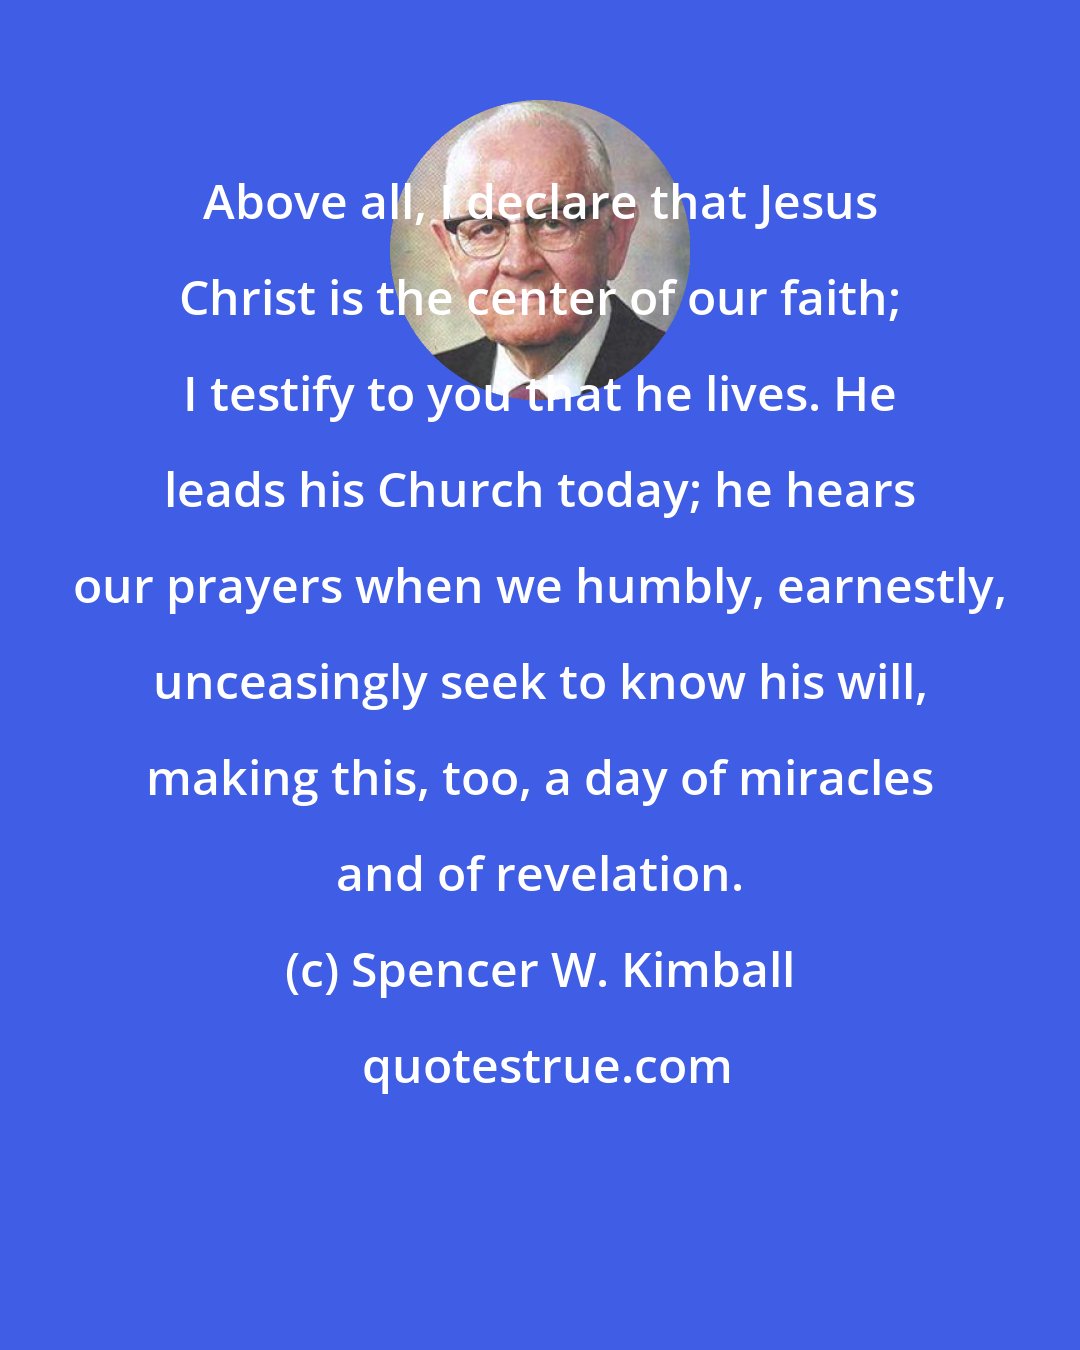 Spencer W. Kimball: Above all, I declare that Jesus Christ is the center of our faith; I testify to you that he lives. He leads his Church today; he hears our prayers when we humbly, earnestly, unceasingly seek to know his will, making this, too, a day of miracles and of revelation.